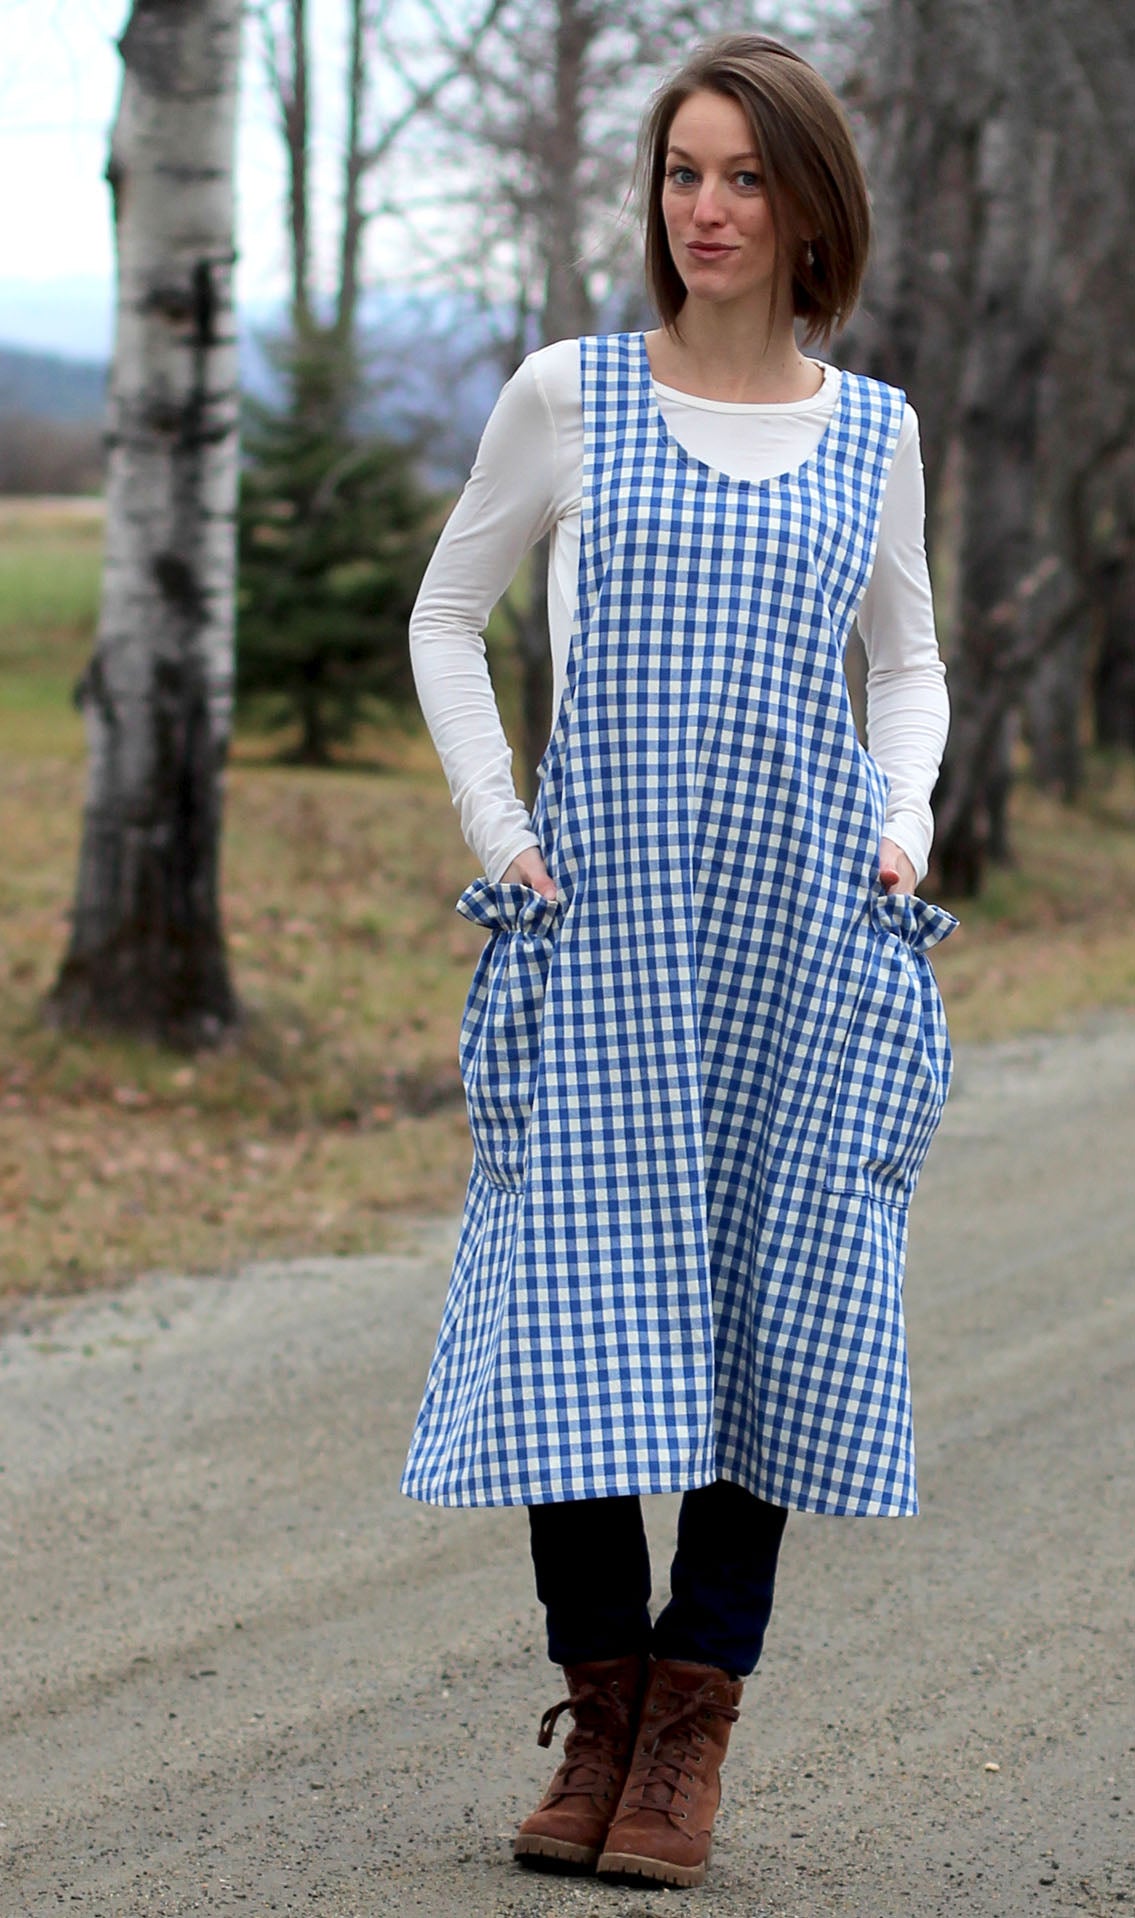 No Tie Apron in Blue and White Check - yet another front view